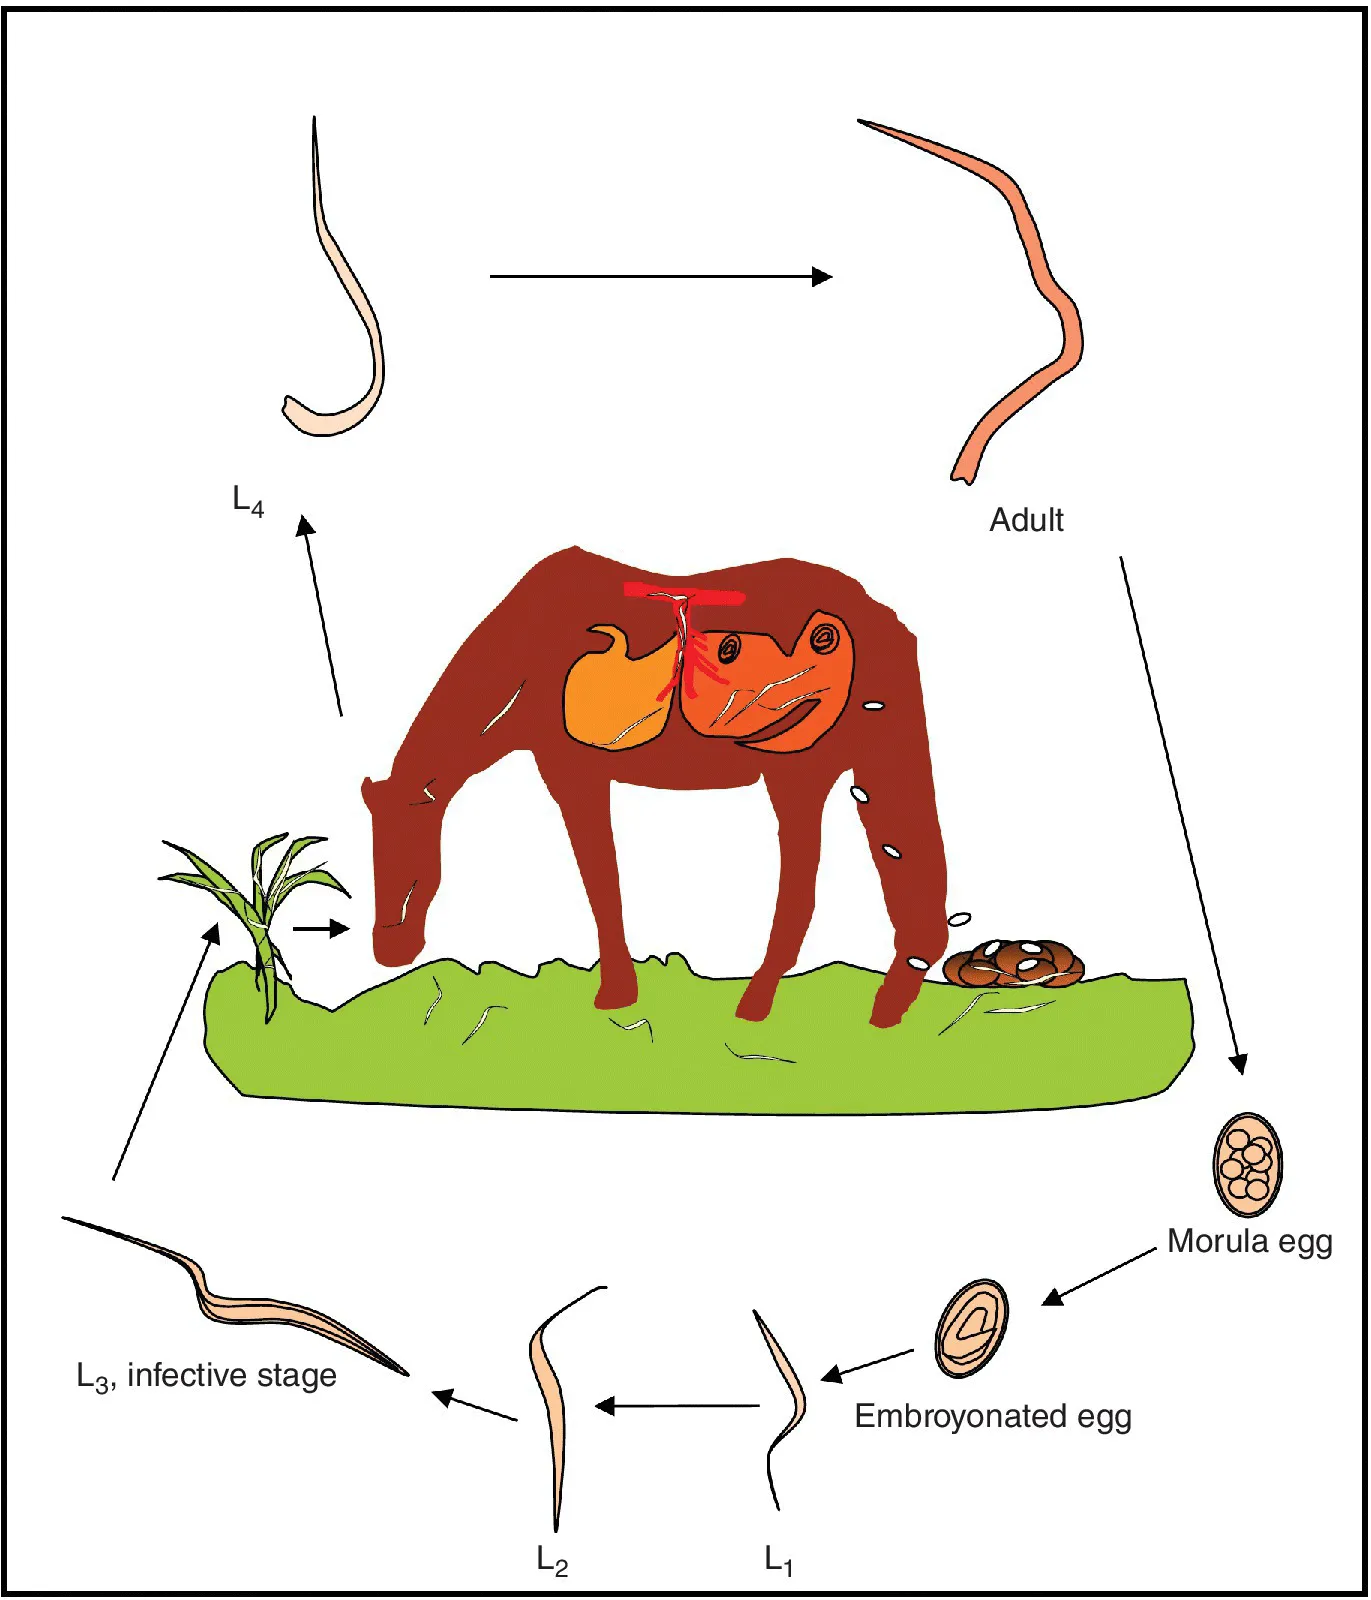 Life cycle diagram with arrows from an adult strongyle to morula egg, to embryonated egg, to L1, to L2, to L3 (infective stage), to a grass with L3, to a horse with L3 inside its stomach, to L4, and back to the adult strongyle.